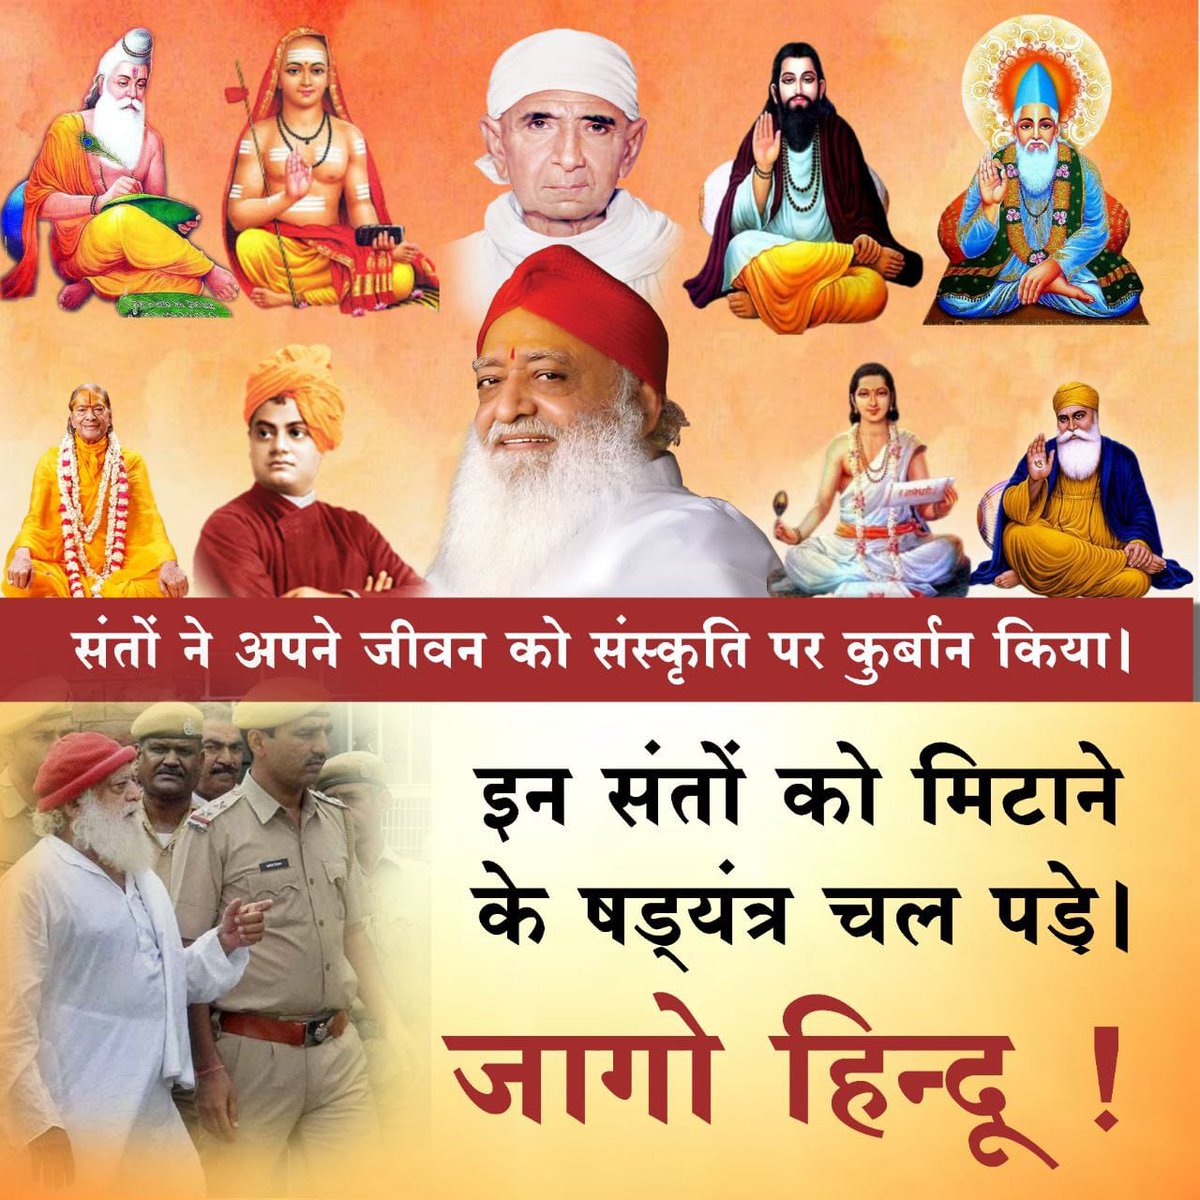 Sanatan Dharma is unscathed even after 800 years of violence filled tyranny. The only reason behind it are Hindu Saints.

They put their lives on the line to safeguard it's relevance among masses. Same thing is  done by Sant Shri Asharamji Bapu
Jaago Hindu
#संत_हैं_तो_संस्कृति_है